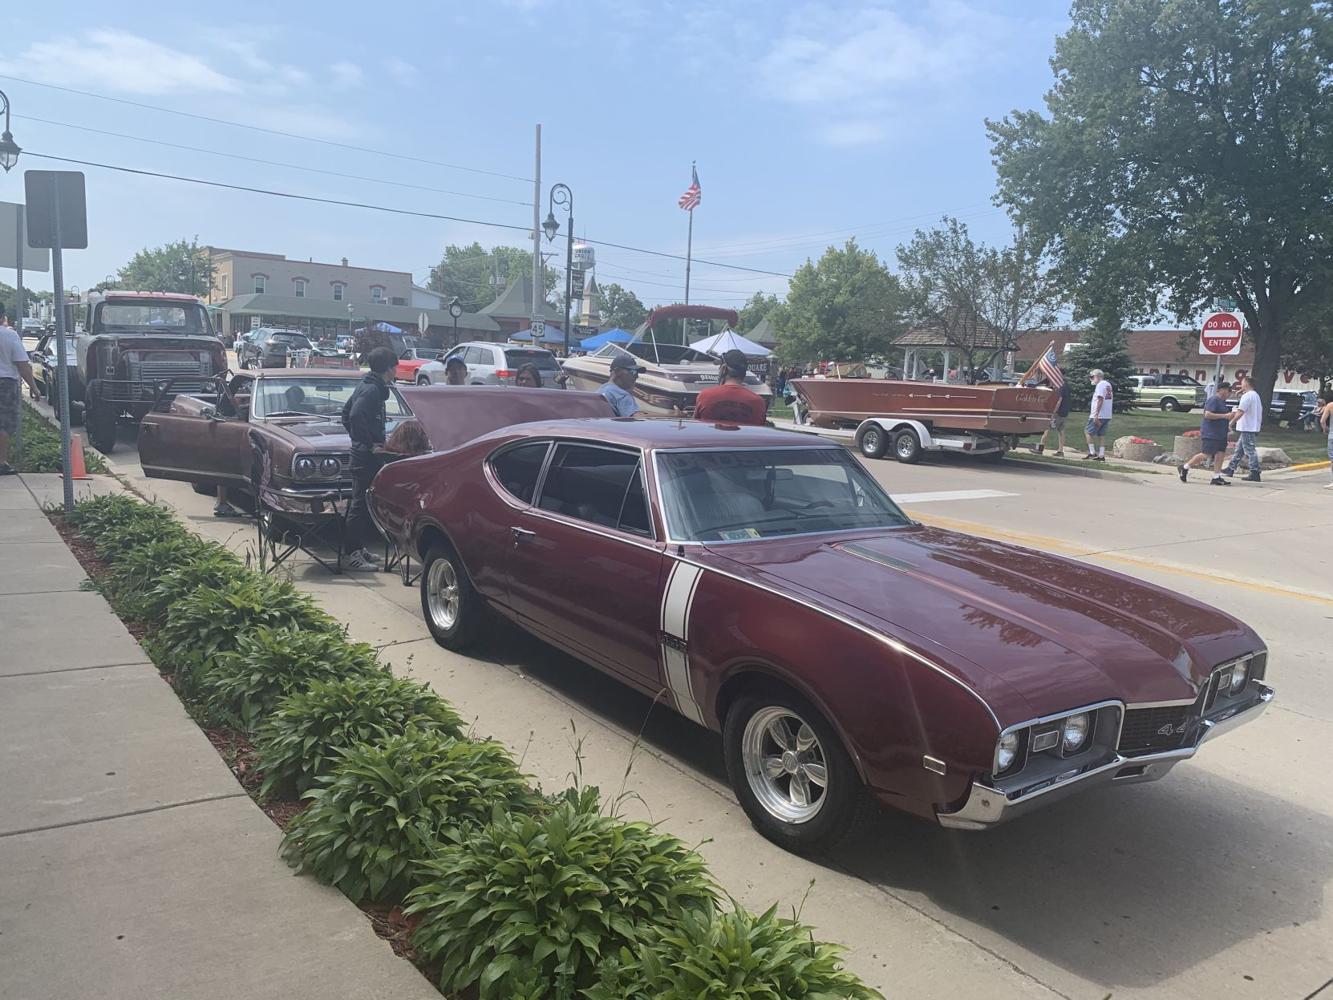 14th Annual Union Grove Car Show to be held Saturday